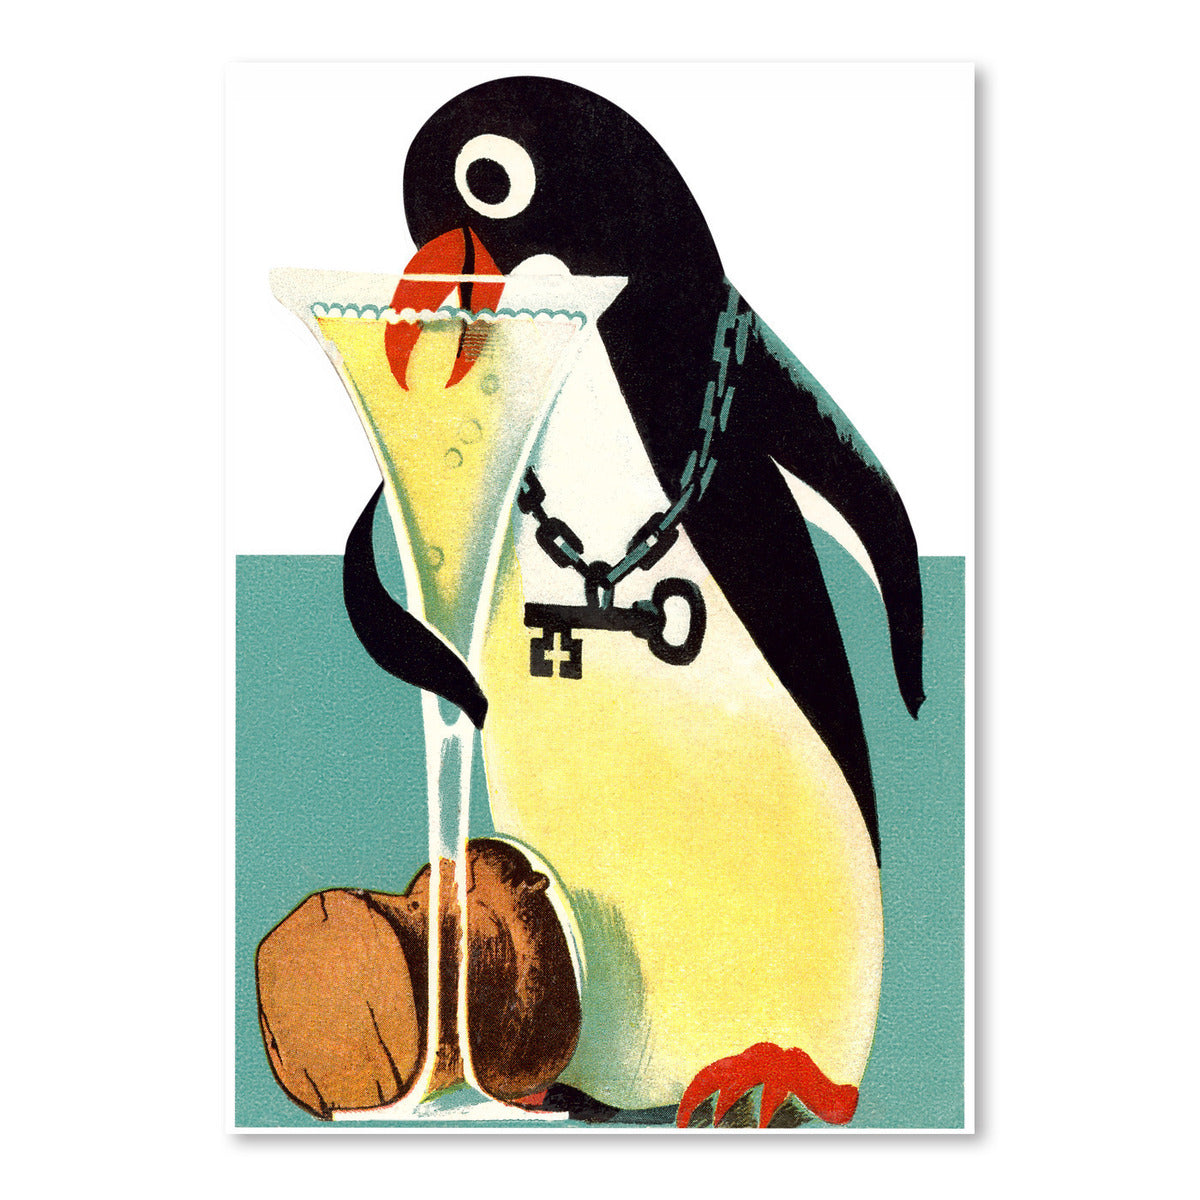 Penguin With Key Drinking Champagne by Found Image Press Art Print - Art Print - Americanflat